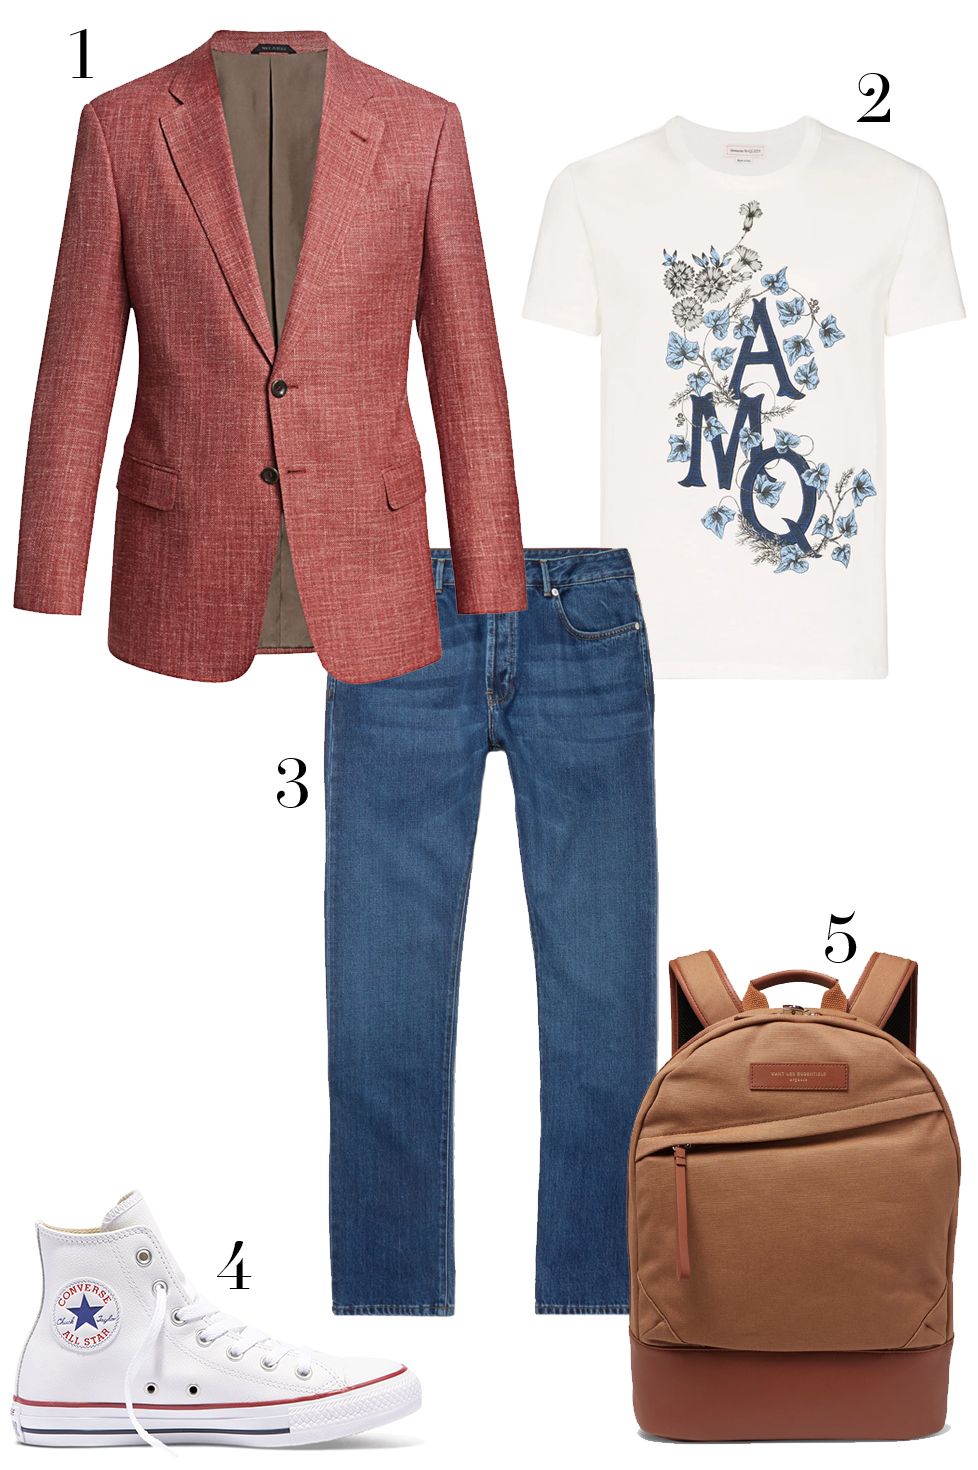 How to Wear a Sport Coat With Jeans